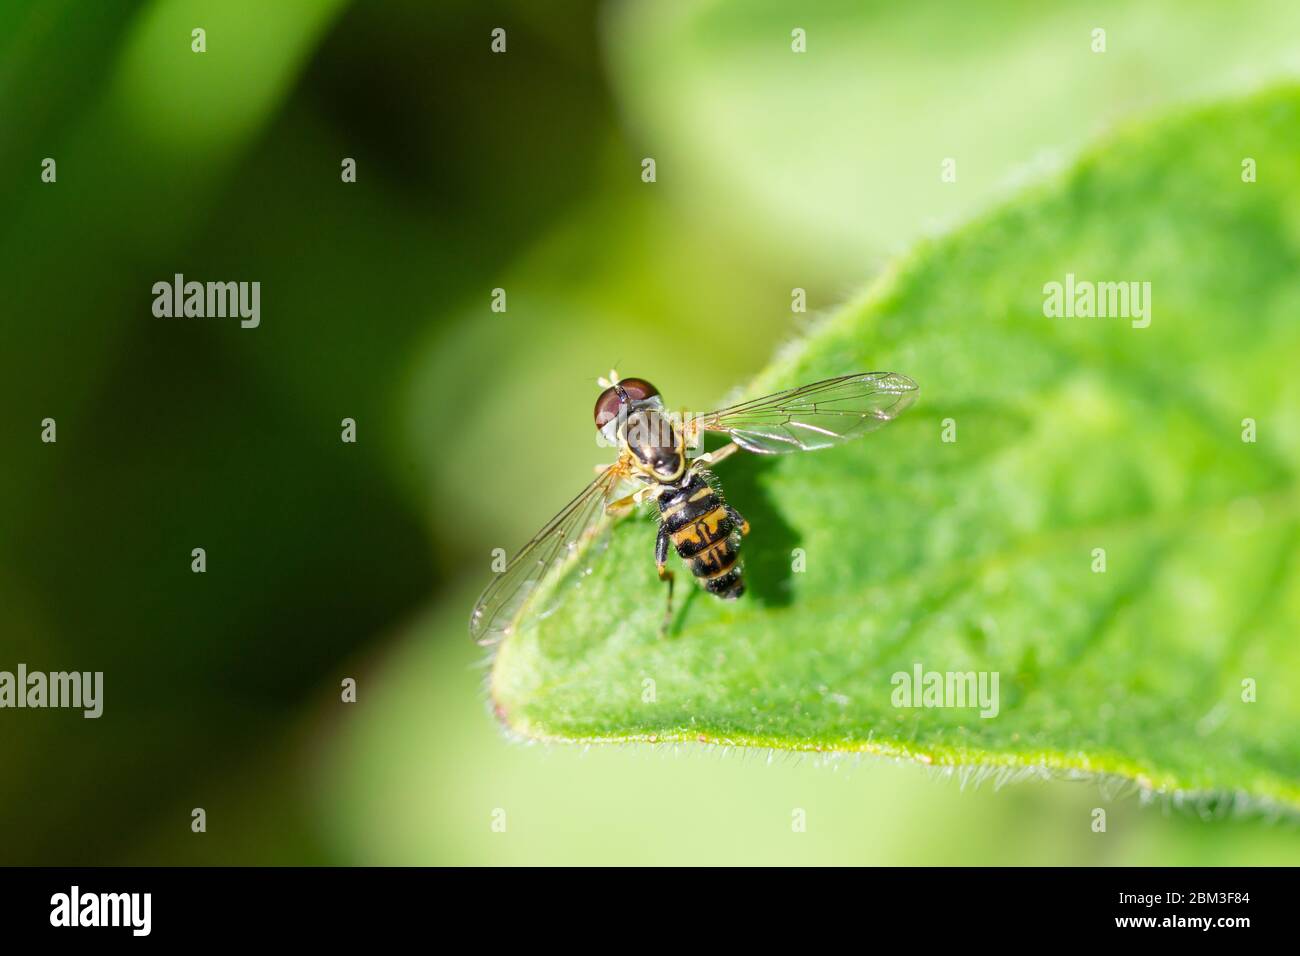 Eastern Calligrapher Fly on Leaf in Springtime Stock Photo